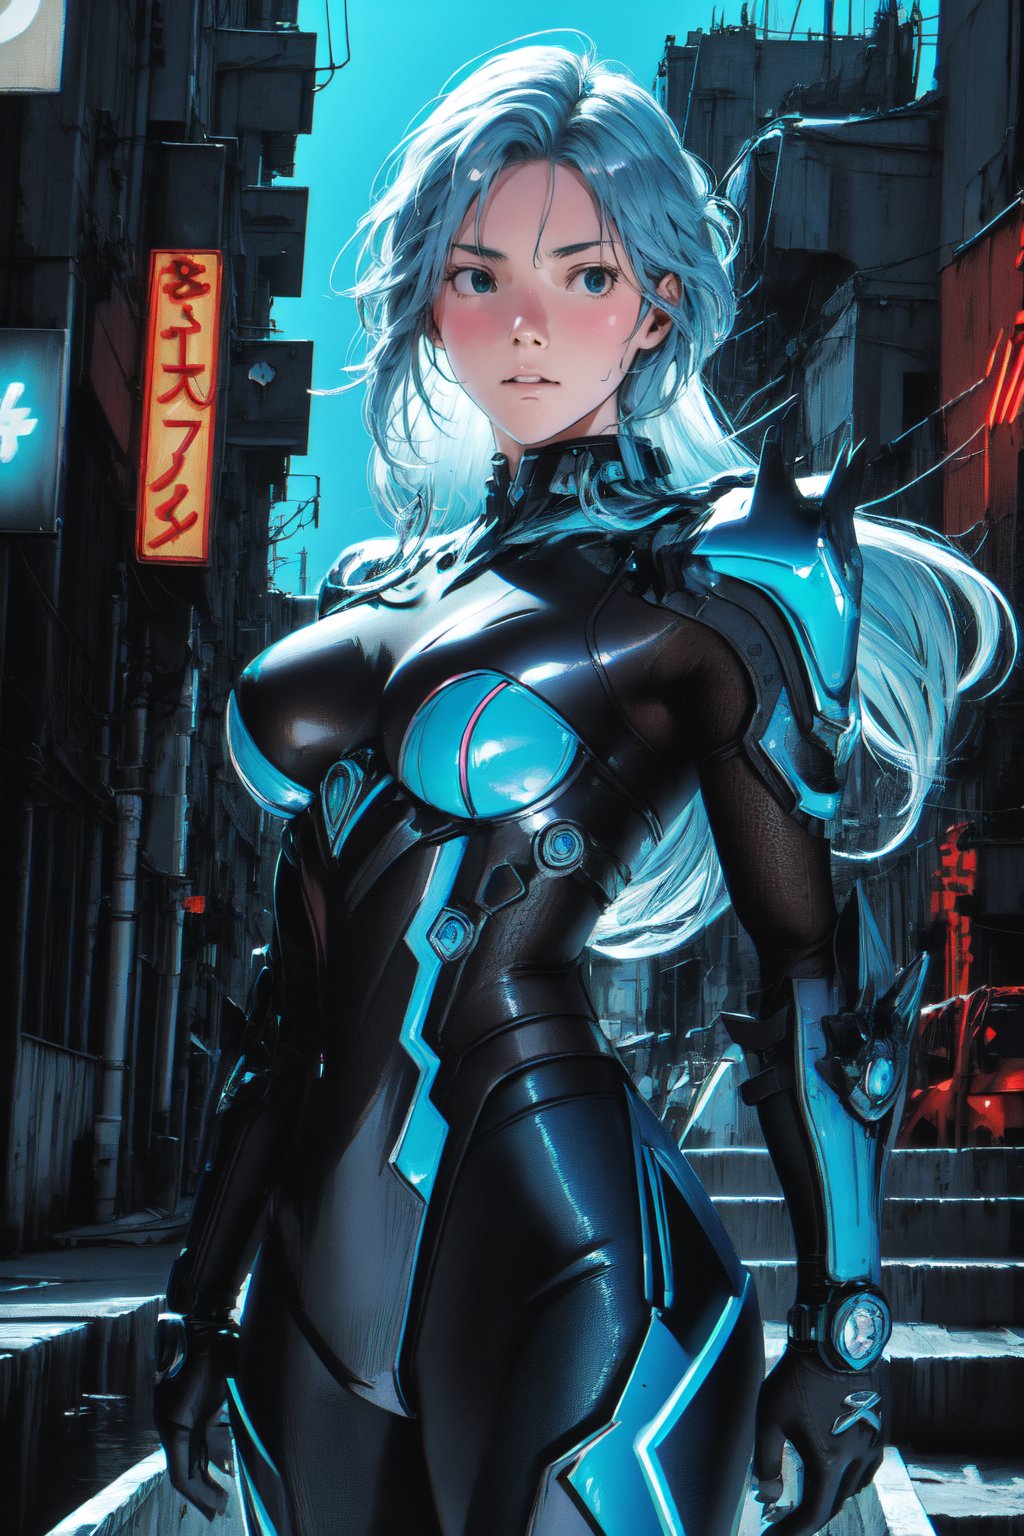 Close-up shot of JeeSoo: Elegant lady with long hair and piercing eyes, radiating confidence in custom-designed cyberpunk blue suit that glows under soft, icy lighting. Sword raised in powerful pose, gaze confronting the viewer. Futuristic backdrop with mecha elements complements her beauty, set against Asia's neon-lit cityscape. 8K resolution rendering every detail with sharp focus and realistic texture.,klee (genshin impact)